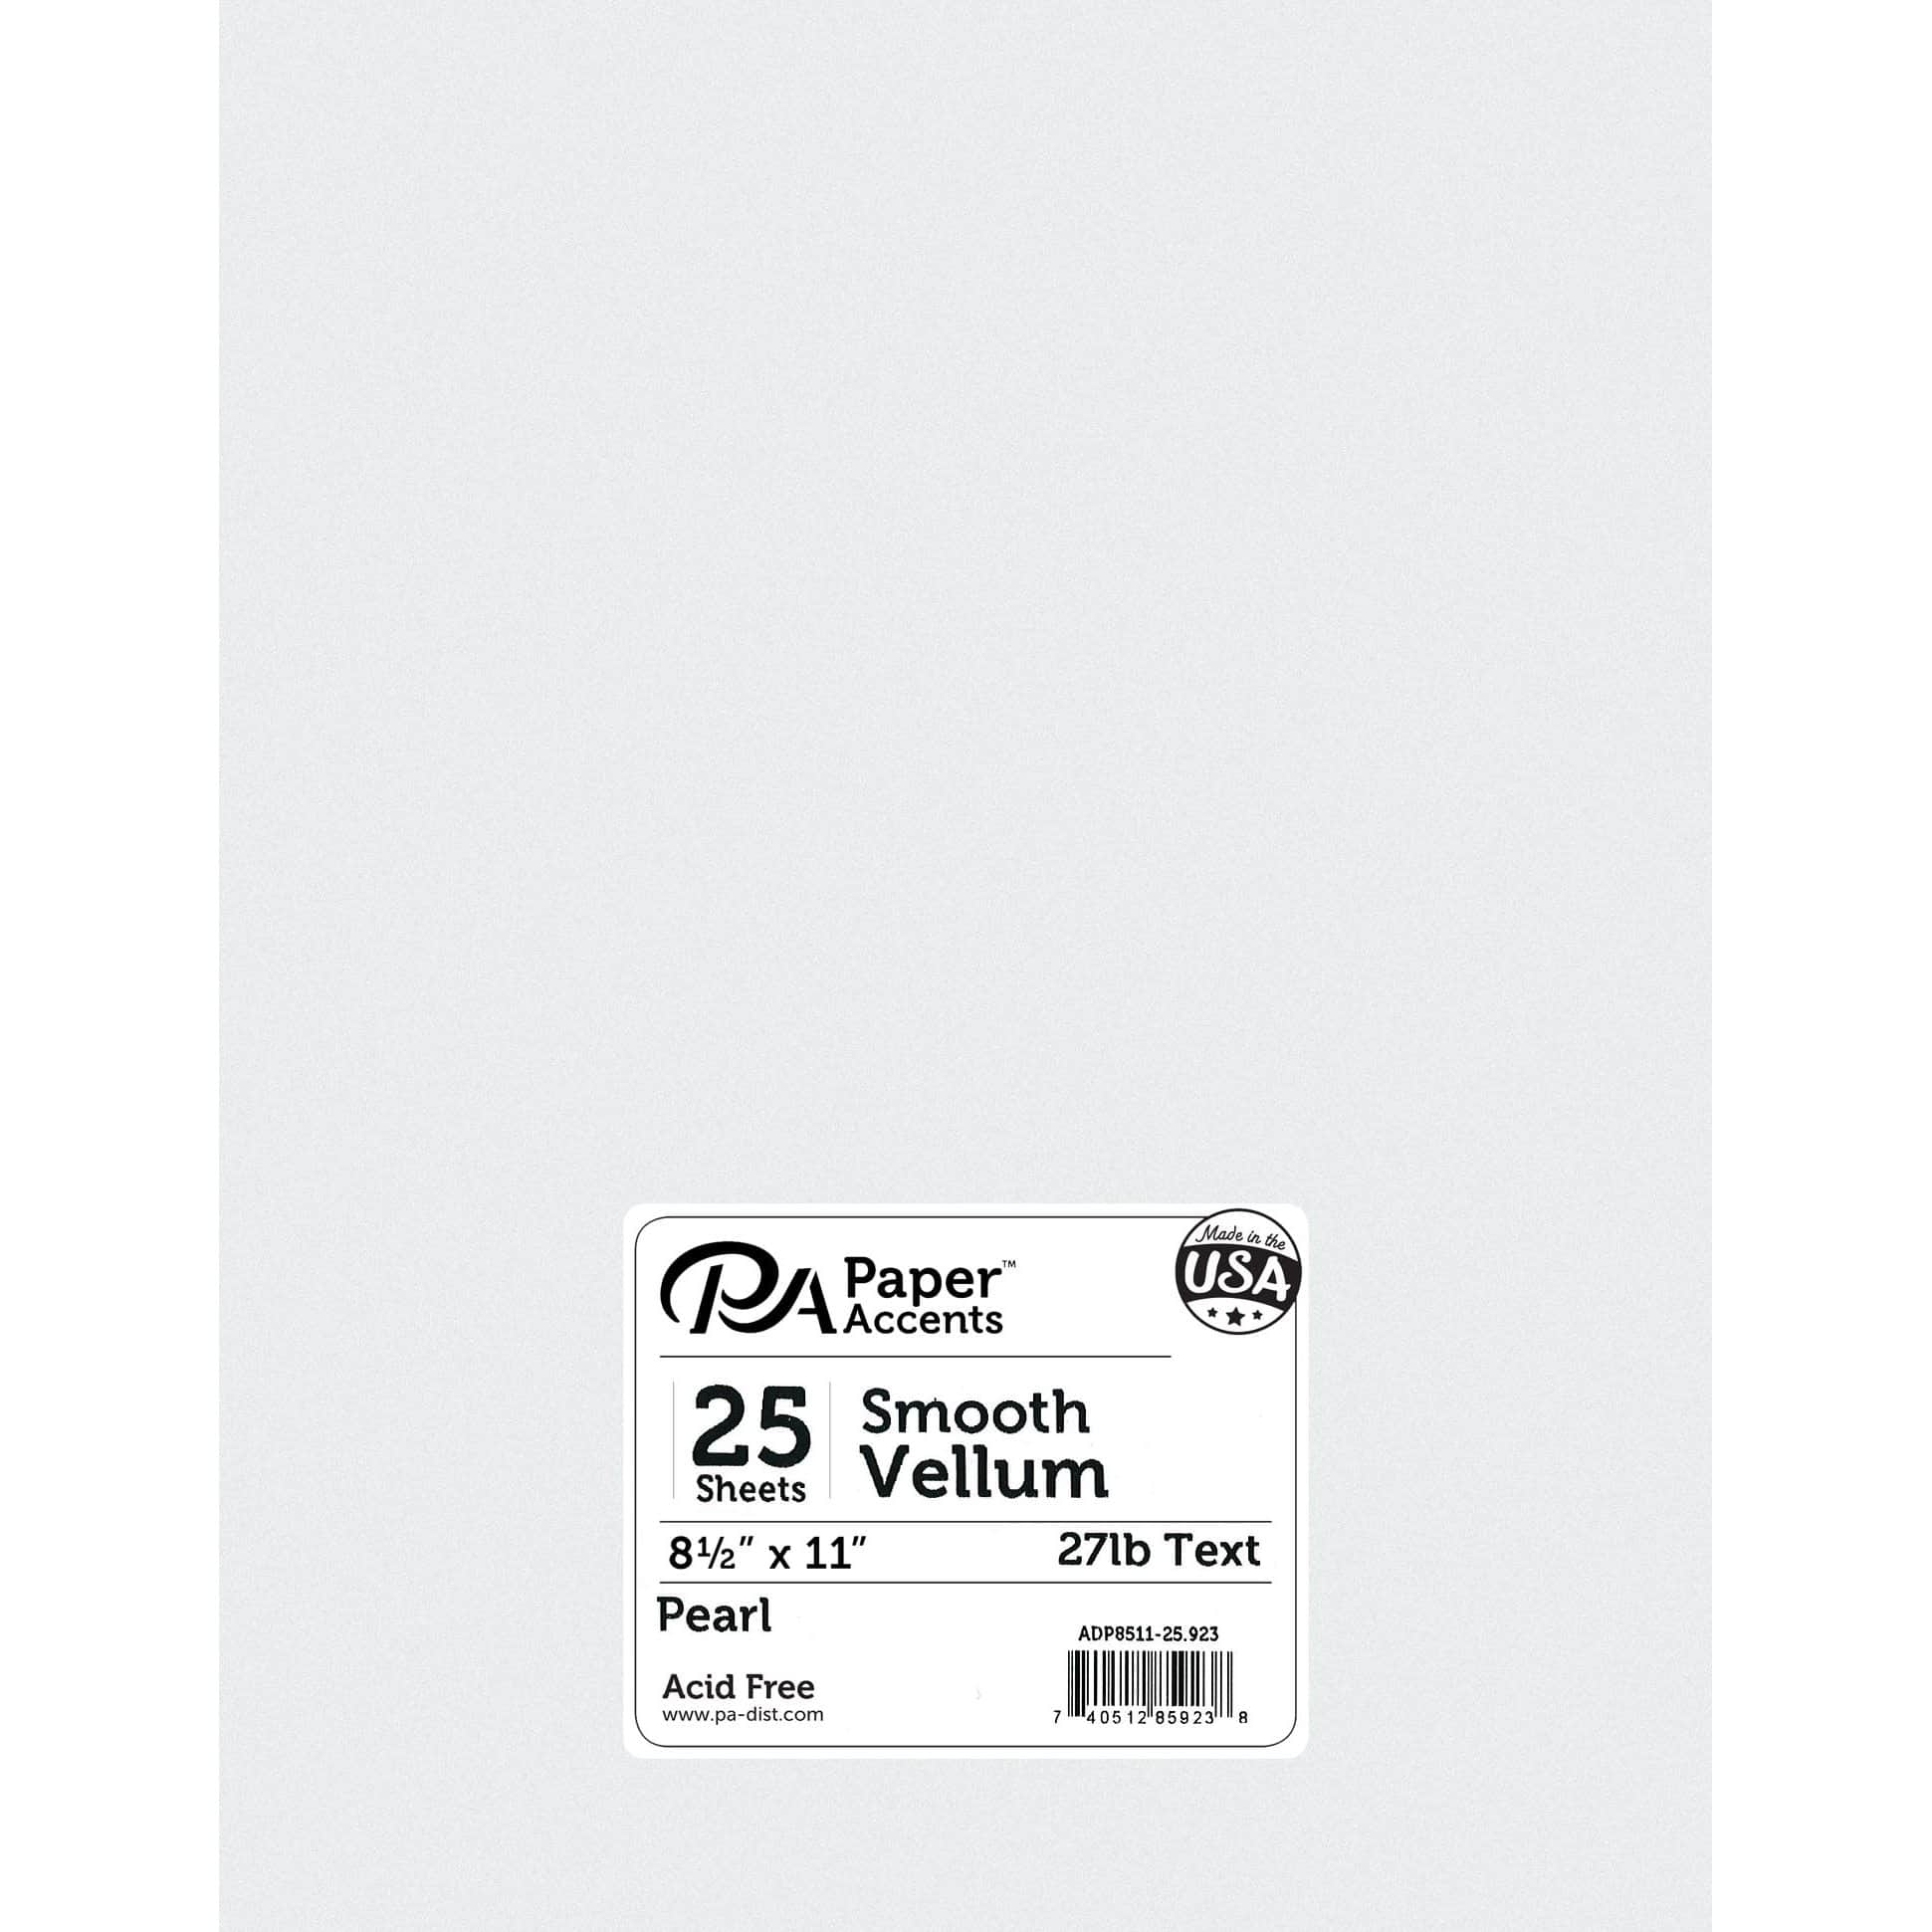 PA Paper™ Accents 8.5'' x 11'' 27lb. Smooth Vellum Paper, 25 Sheets